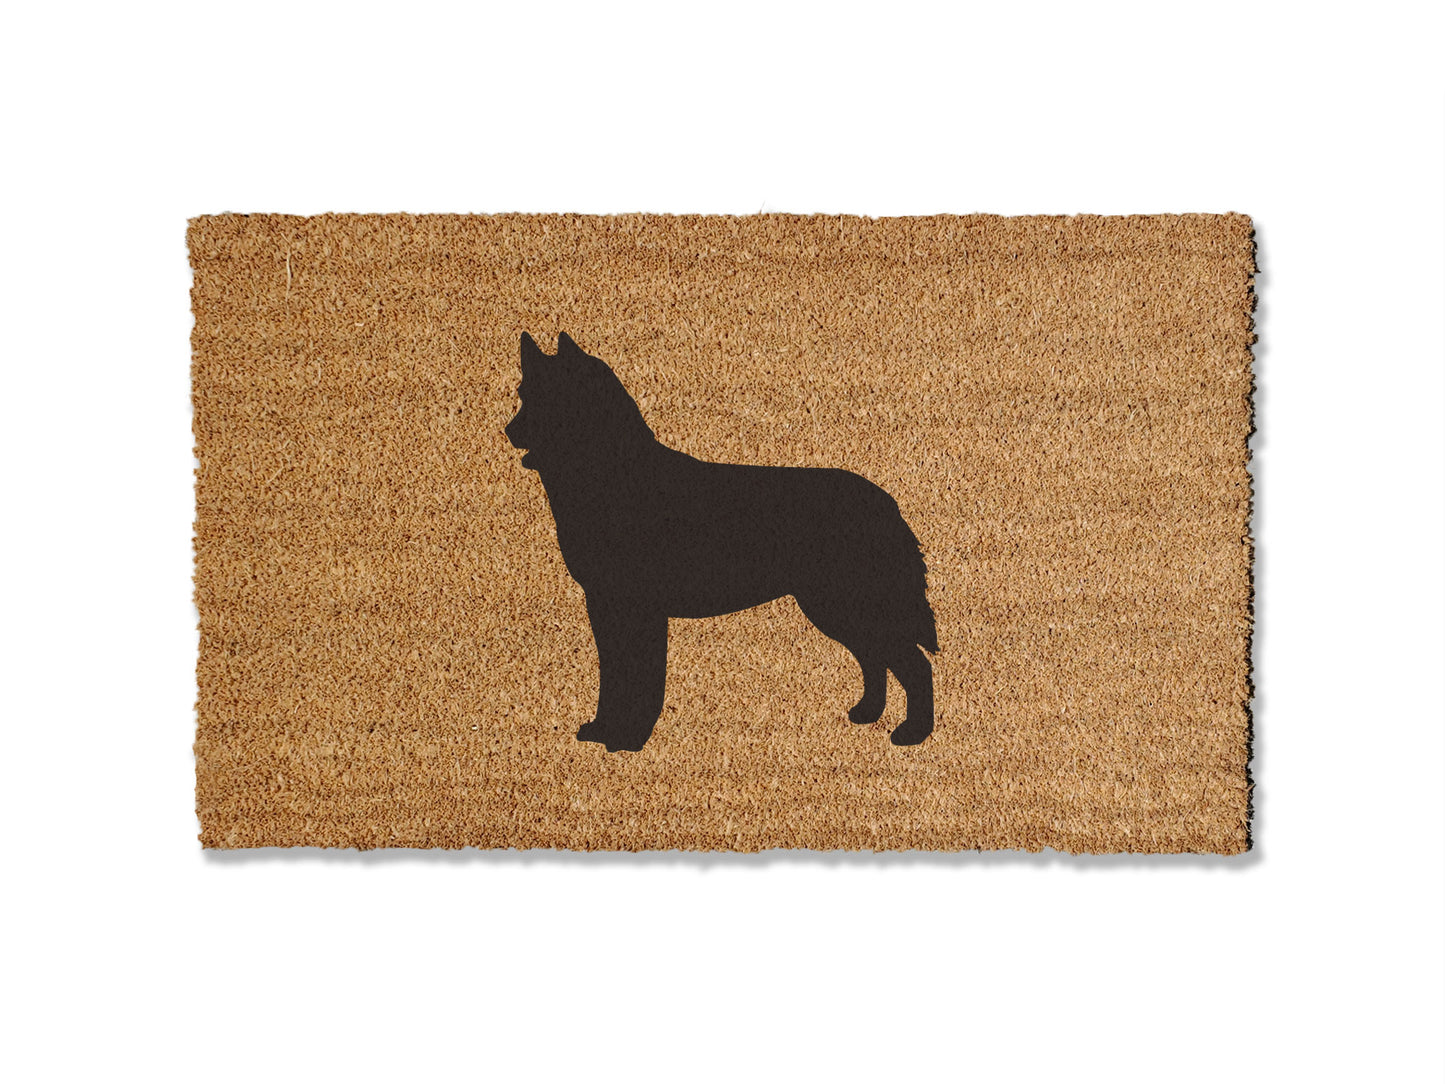 Welcome guests with our coir welcome doormat, featuring a charming Husky Dog design. Available in multiple sizes, this is the perfect gift for Husky lovers, adding a touch of canine charm that effortlessly spruces up your entryway.